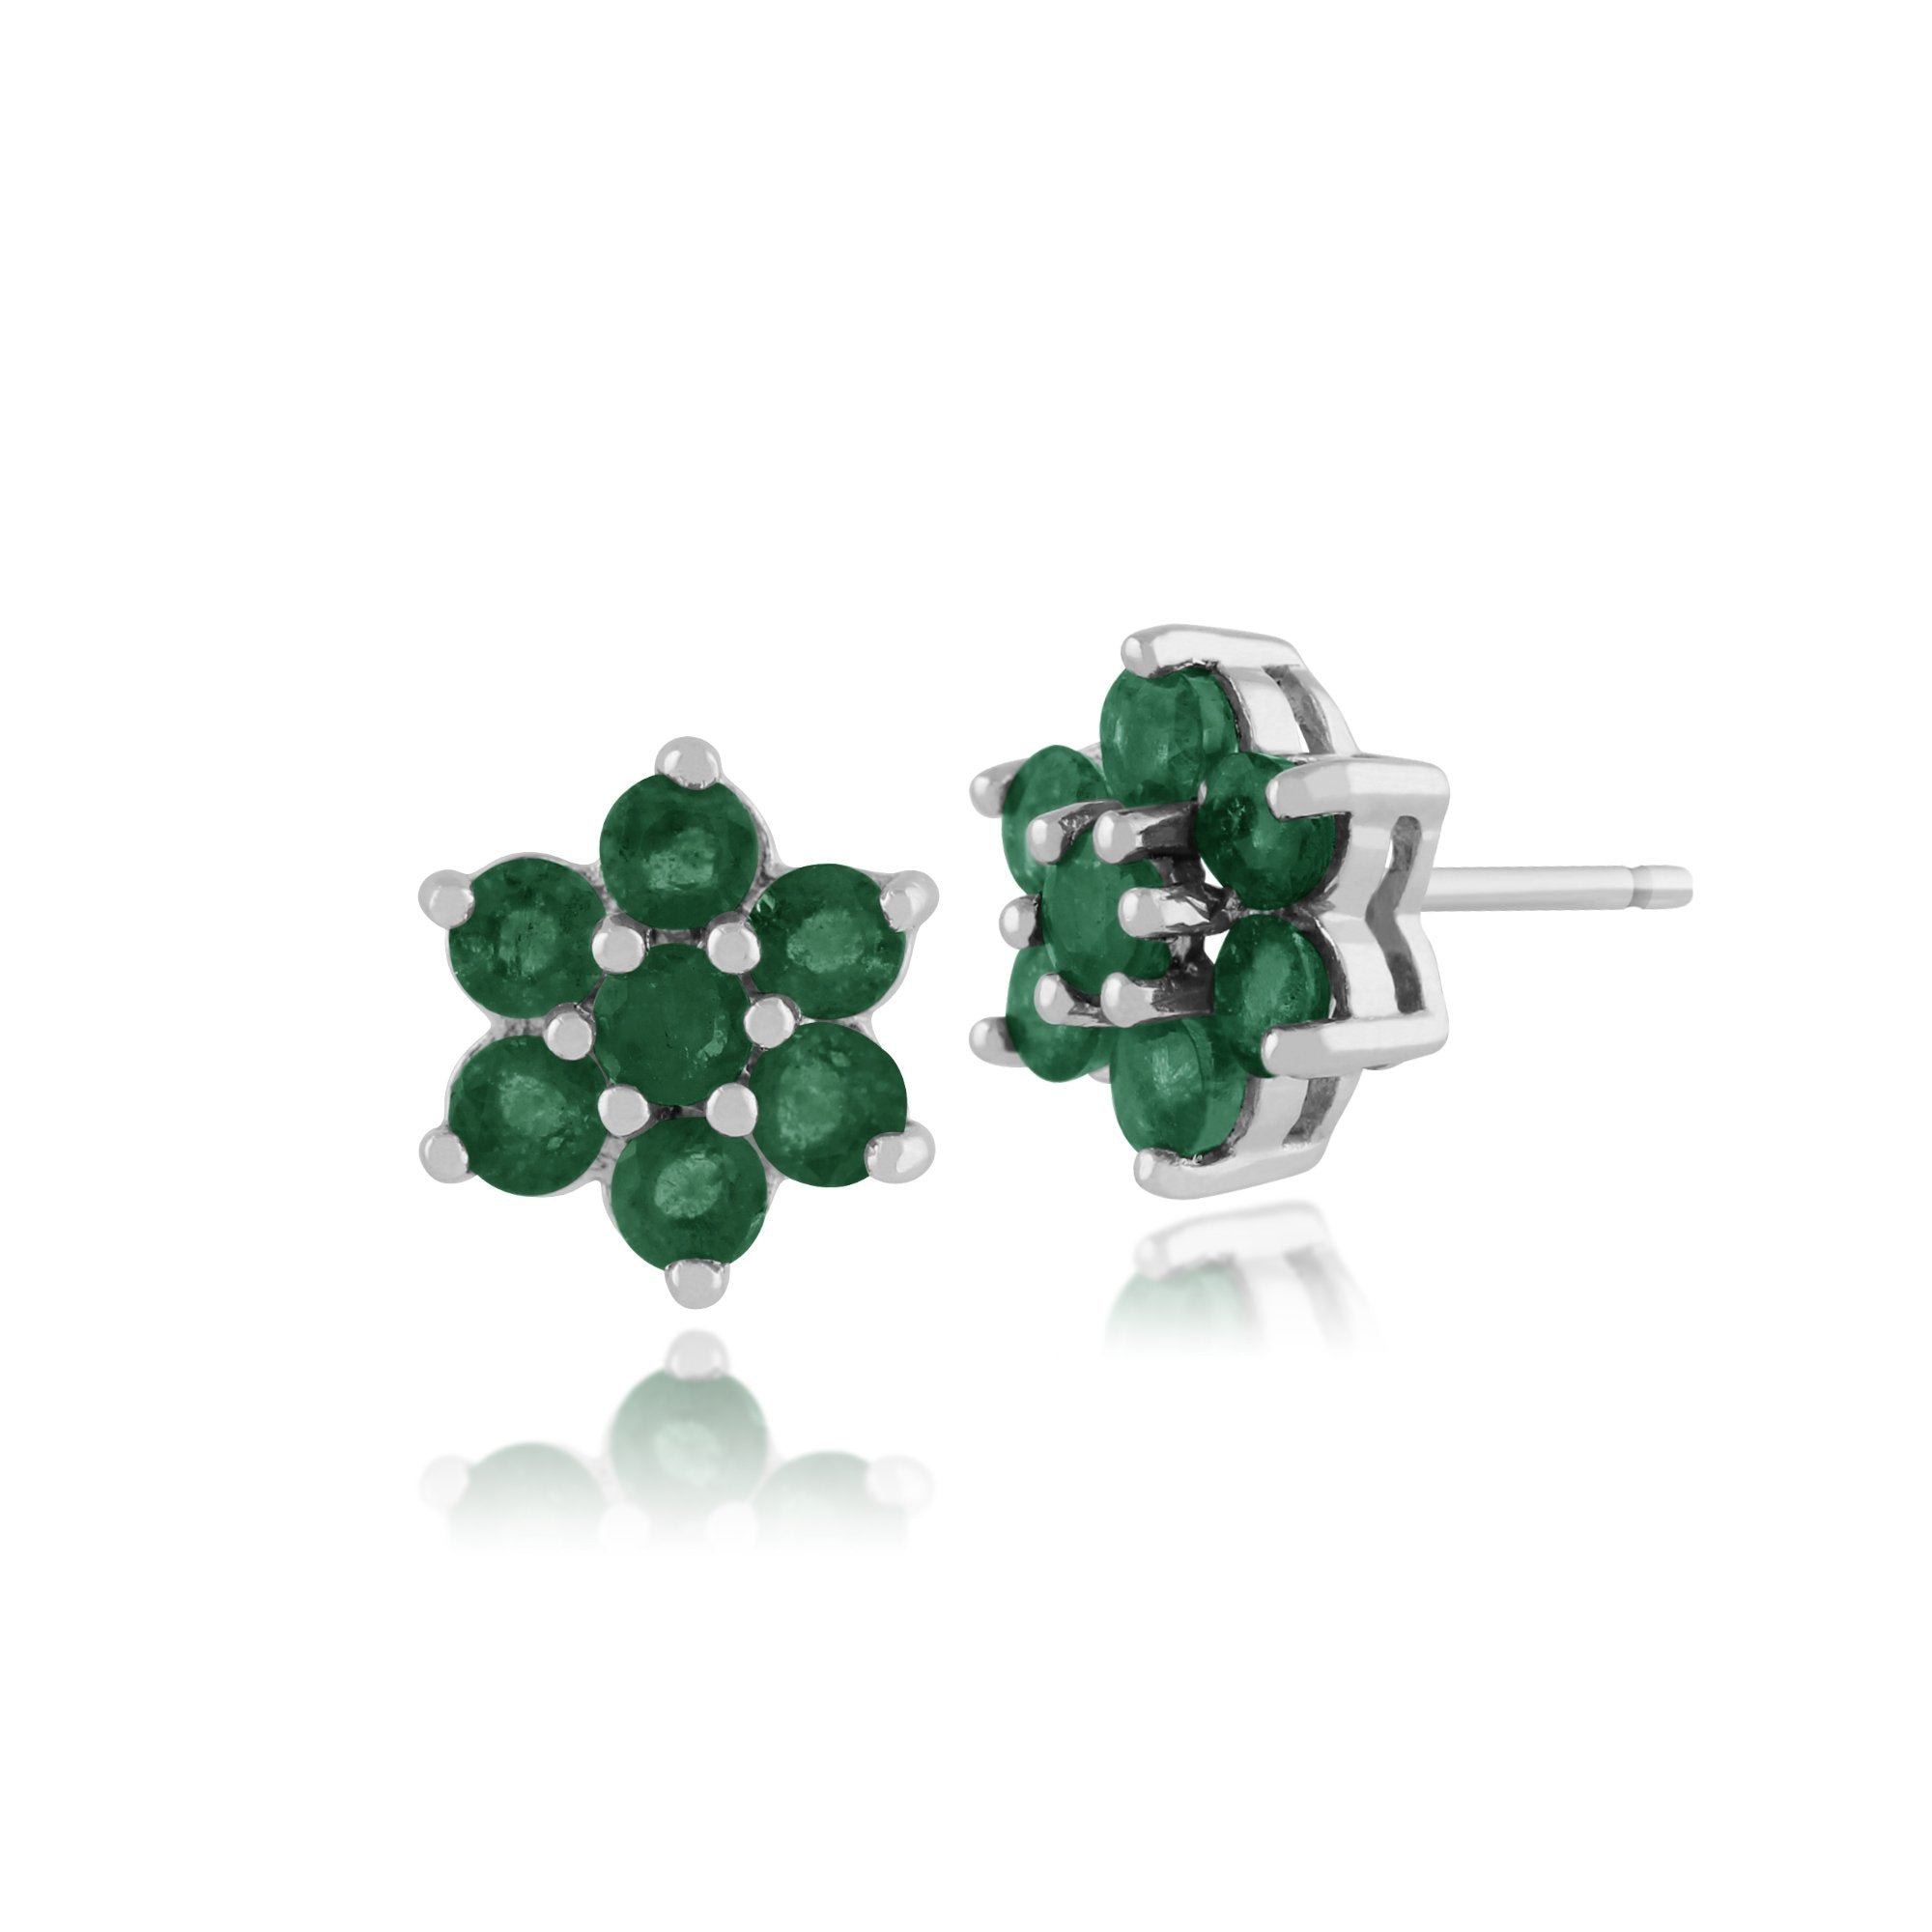 Floral Round Emerald Cluster Stud Earrings in 925 Sterling Silver